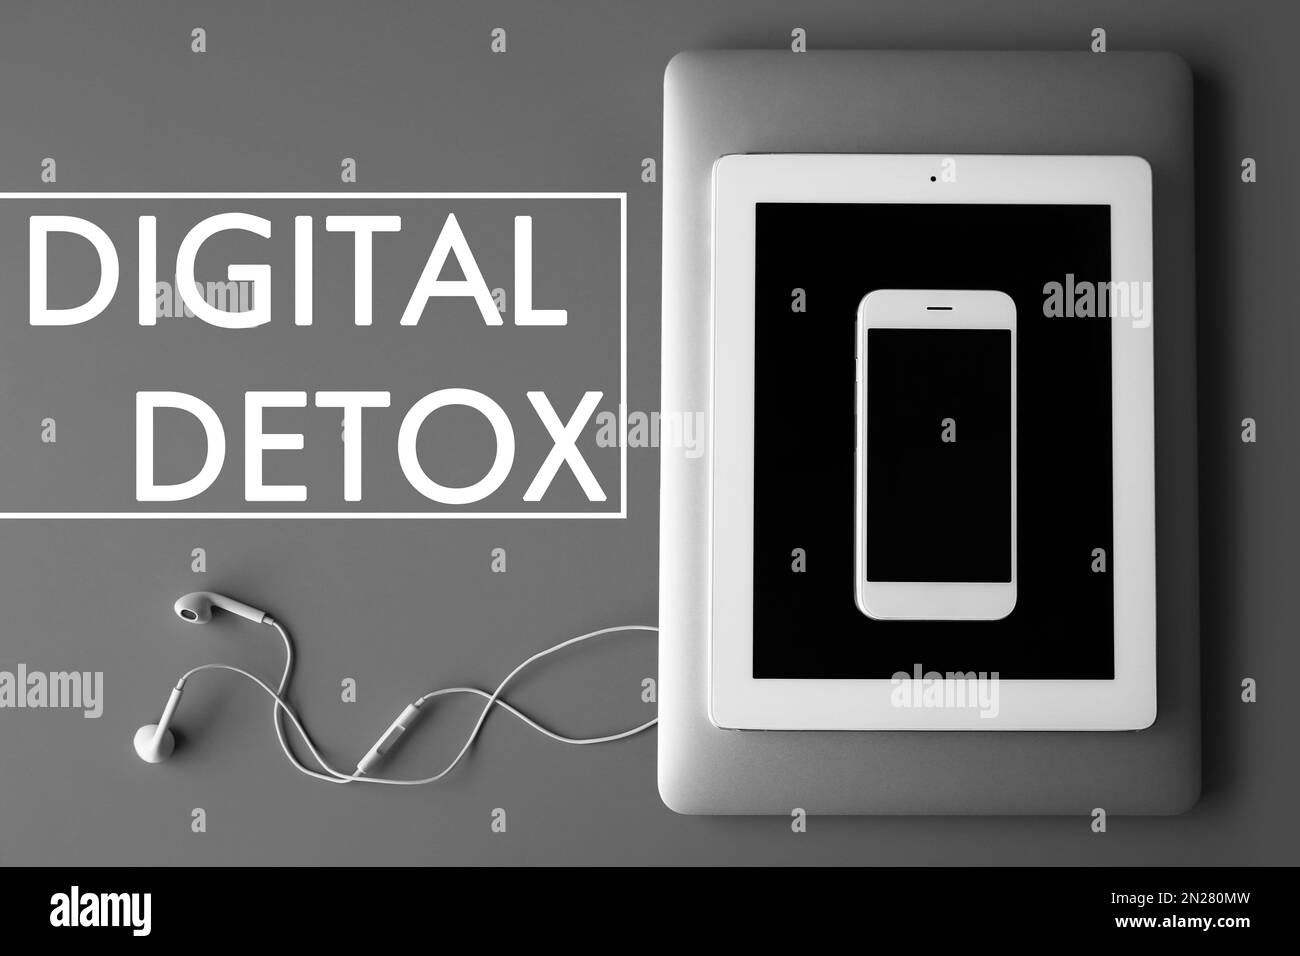 Text Digital detox and devices on grey background, top view Stock Photo